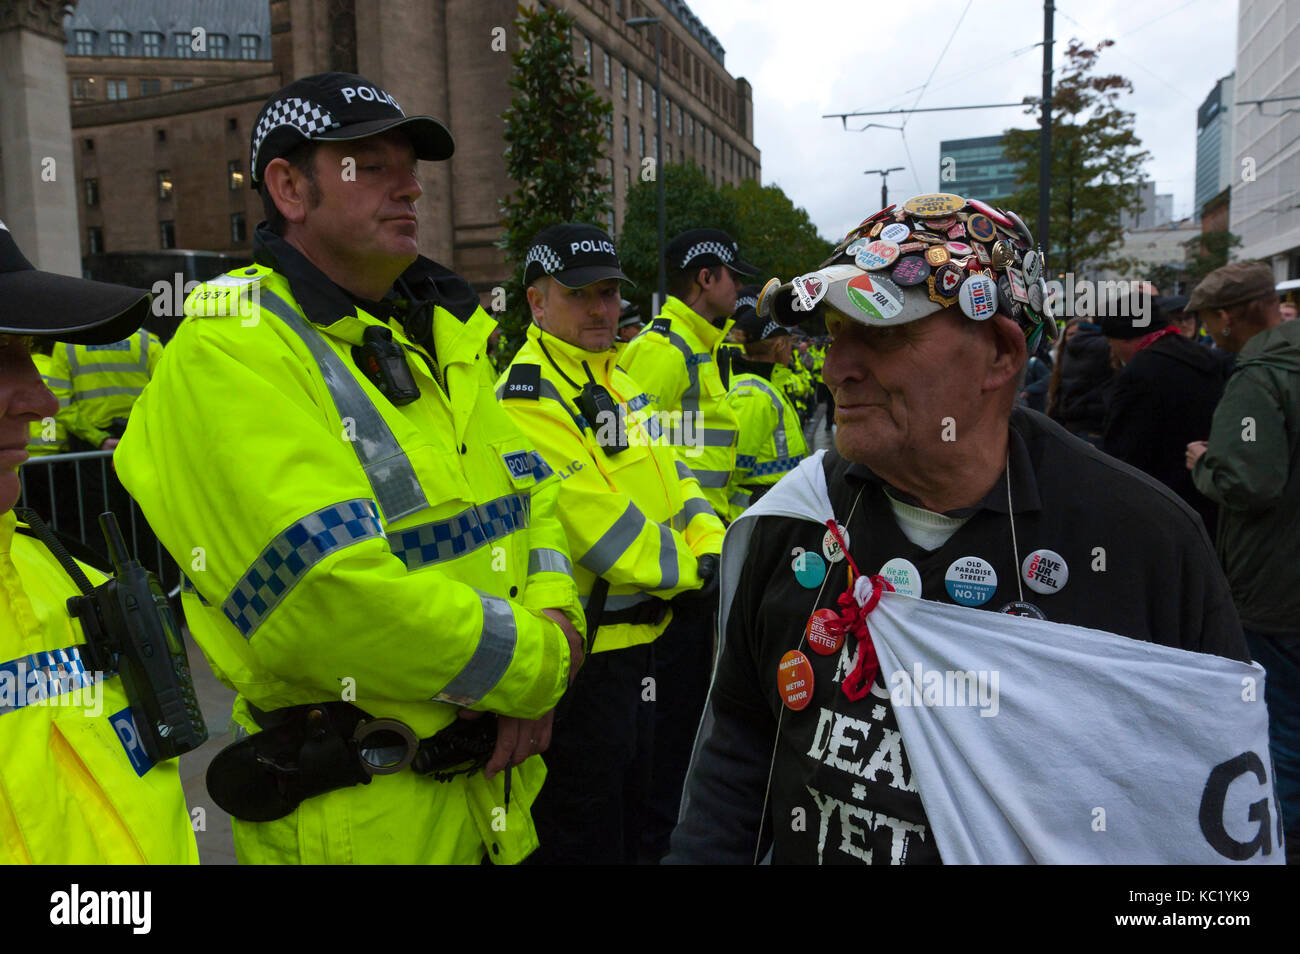 Manchester, UK. 1st October, 2017. Retired carpenter & joiner eighty-three-year-old Terry Hutt from Camden, London, walks a line of police officers near the Tory Party Conference Centre. Terry is an activist for DAN - Direct Action network. Ant-Fracking activists and dusabled anti Tory activists meet heavy police security at St Peter's Square near the Conference Centre. Pro-peace, anti-austerity, anti-war protests, including rallies, public meetings, comedy, music, & culture, take place during the four days of the Conservative Party Conference in Manchester, UK. 1st - 4th Oct 2017. The protes Stock Photo